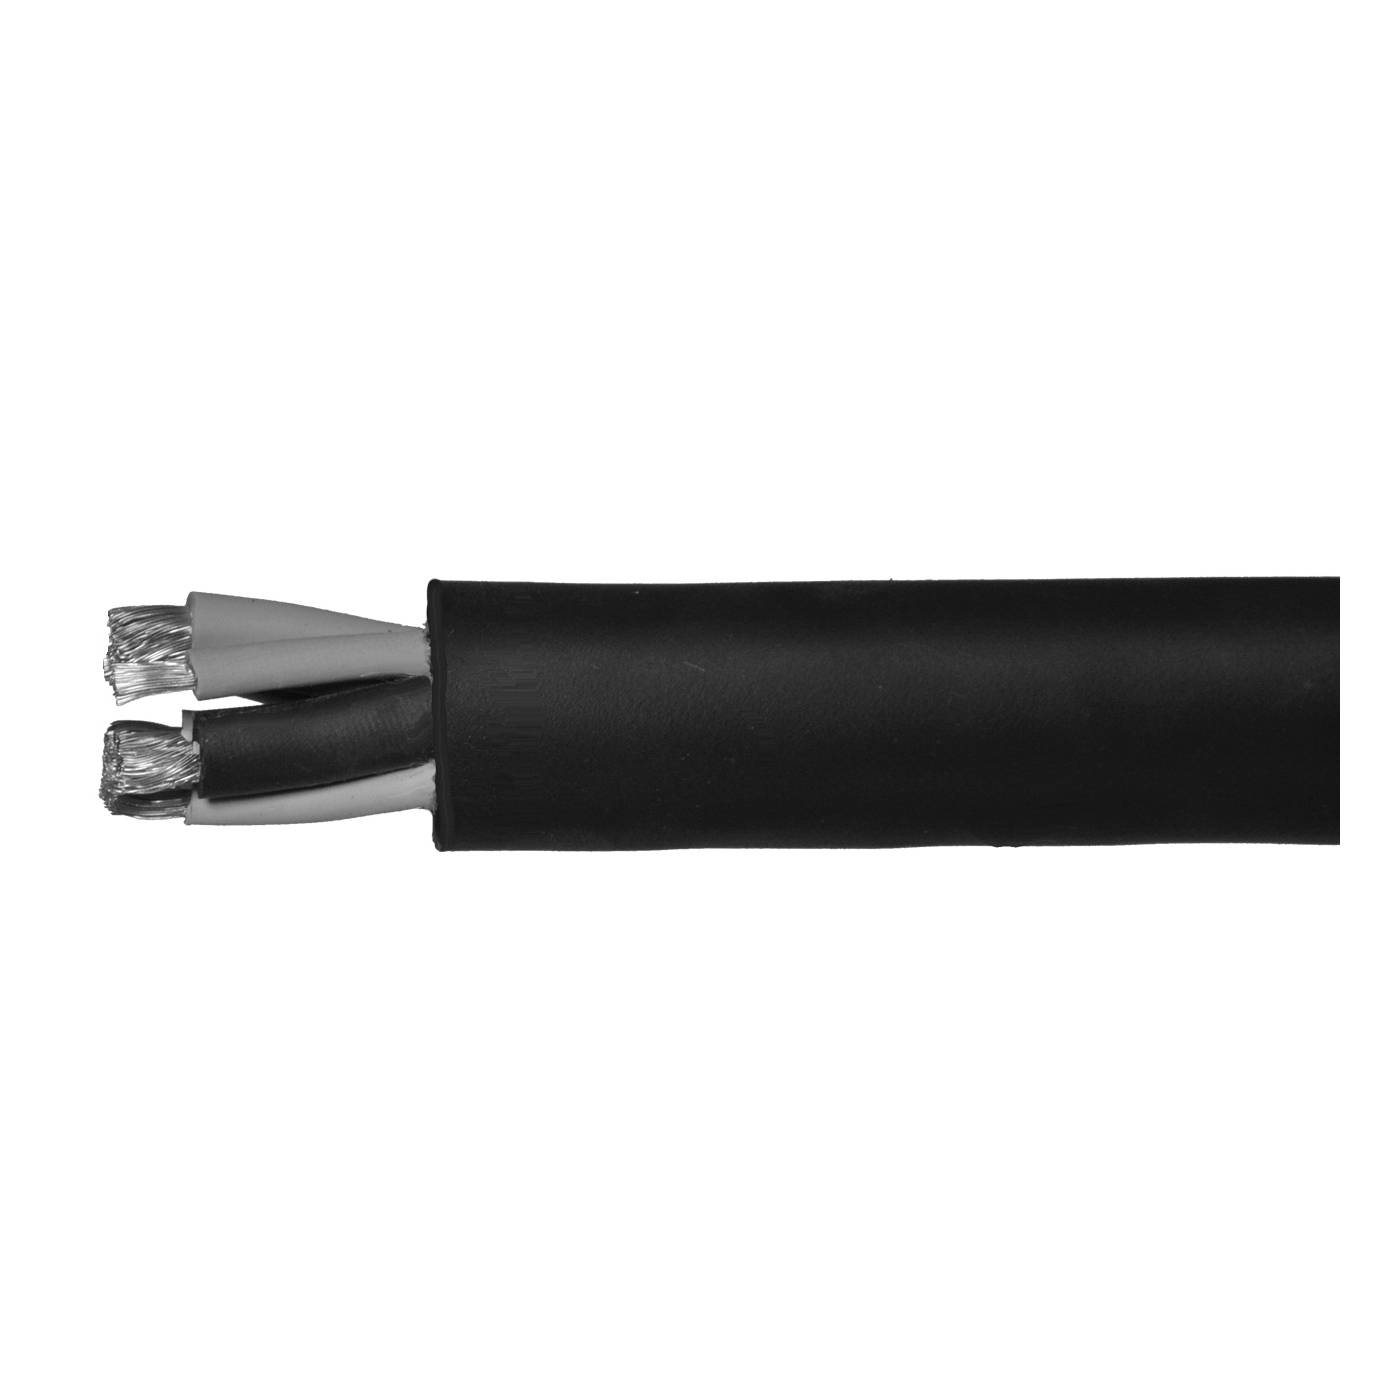 Omni Cable B11616 Type SOOW Flexible Portable Cord, 600 VAC, (16) 16 AWG Fully Annealed Bare Stranded Copper Conductor